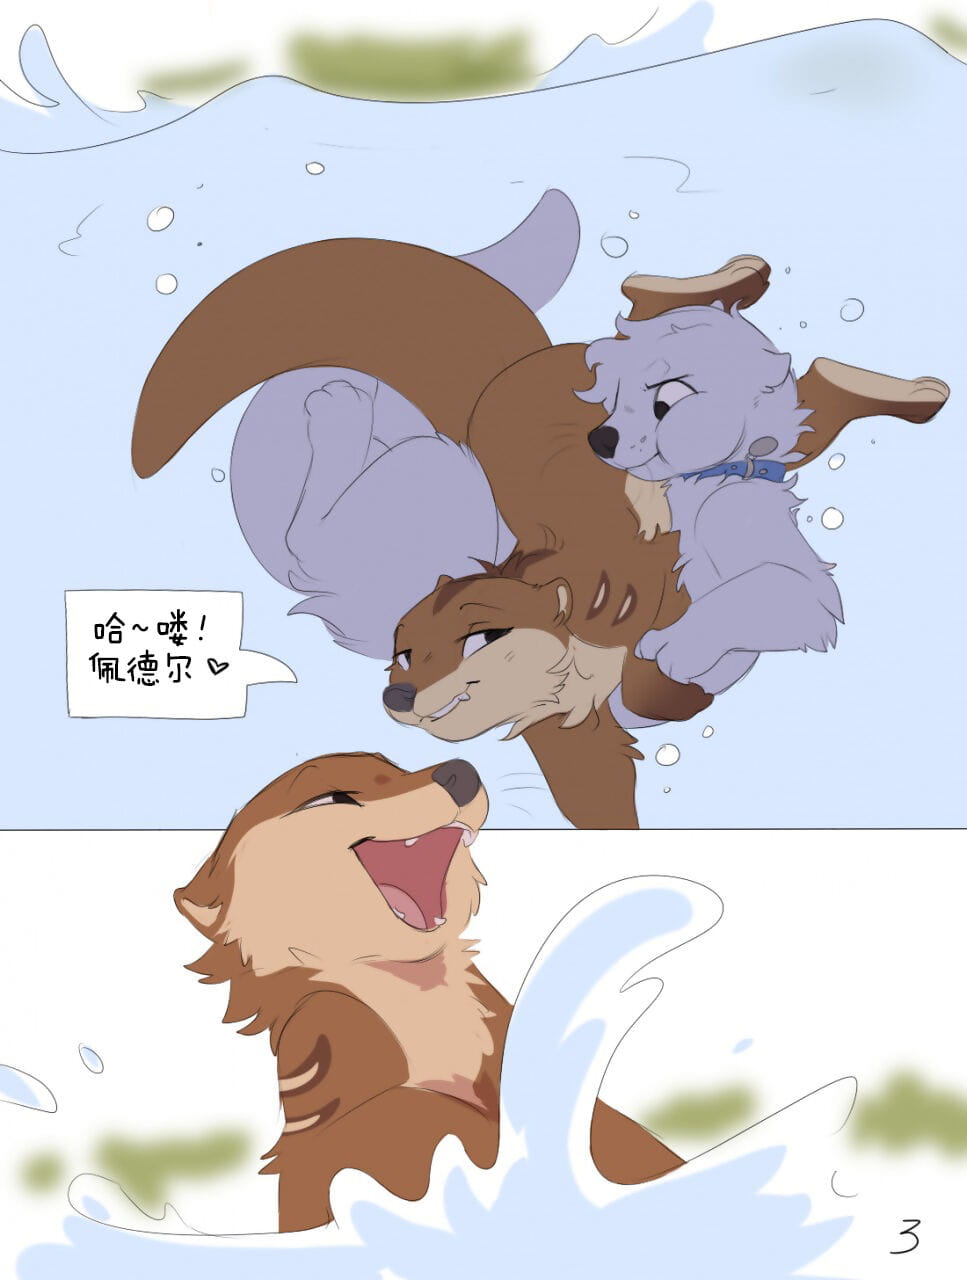 Personal Otter Space - 水獭的私人空间 page 1